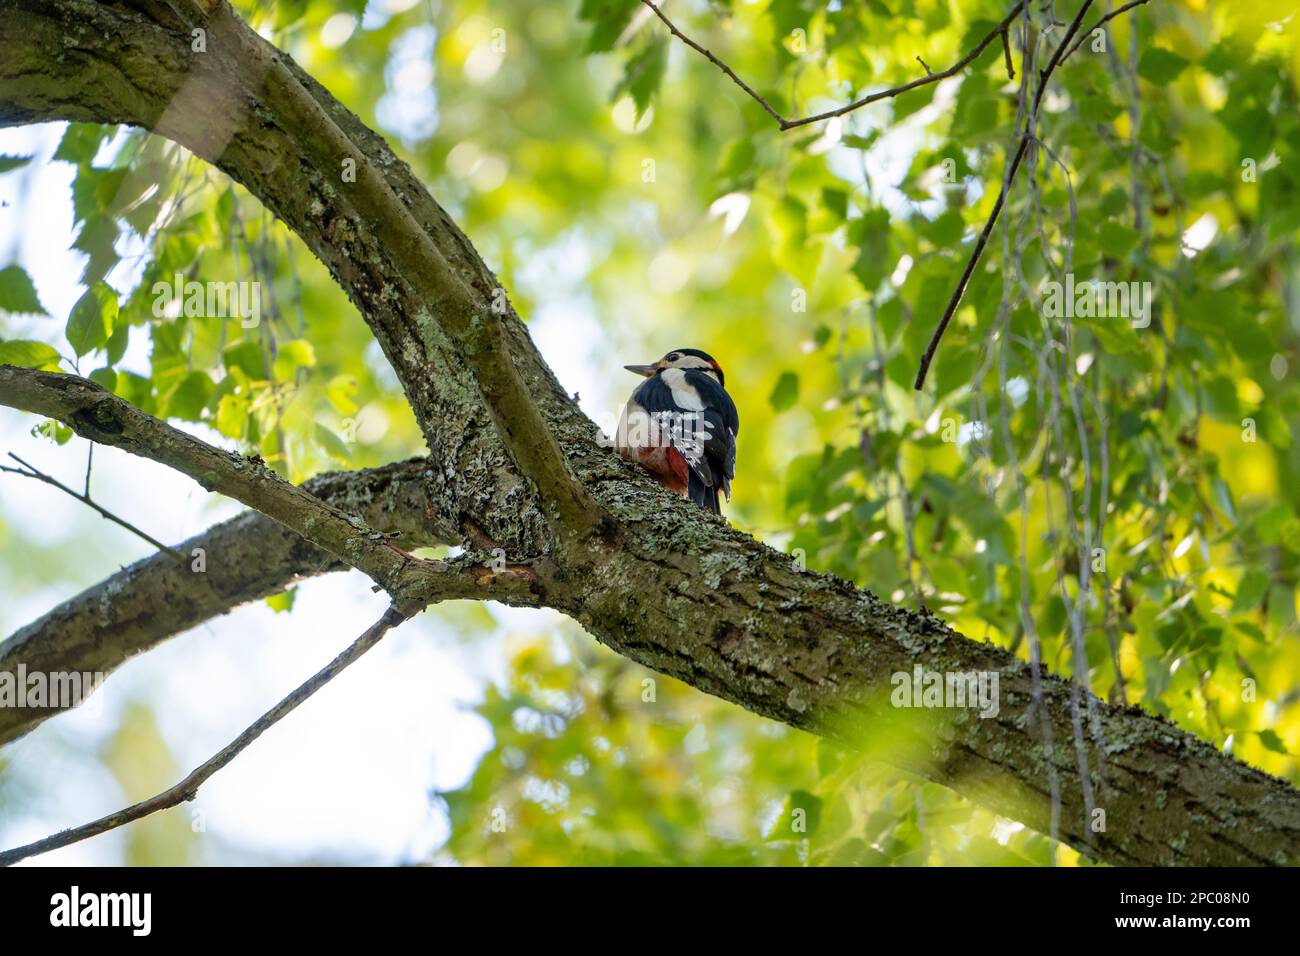 Great Spotted Woodpecker, The woodpecker often symbolizes the new opportunities that come knocking into our lives; it reminds us that we must answer t Stock Photo